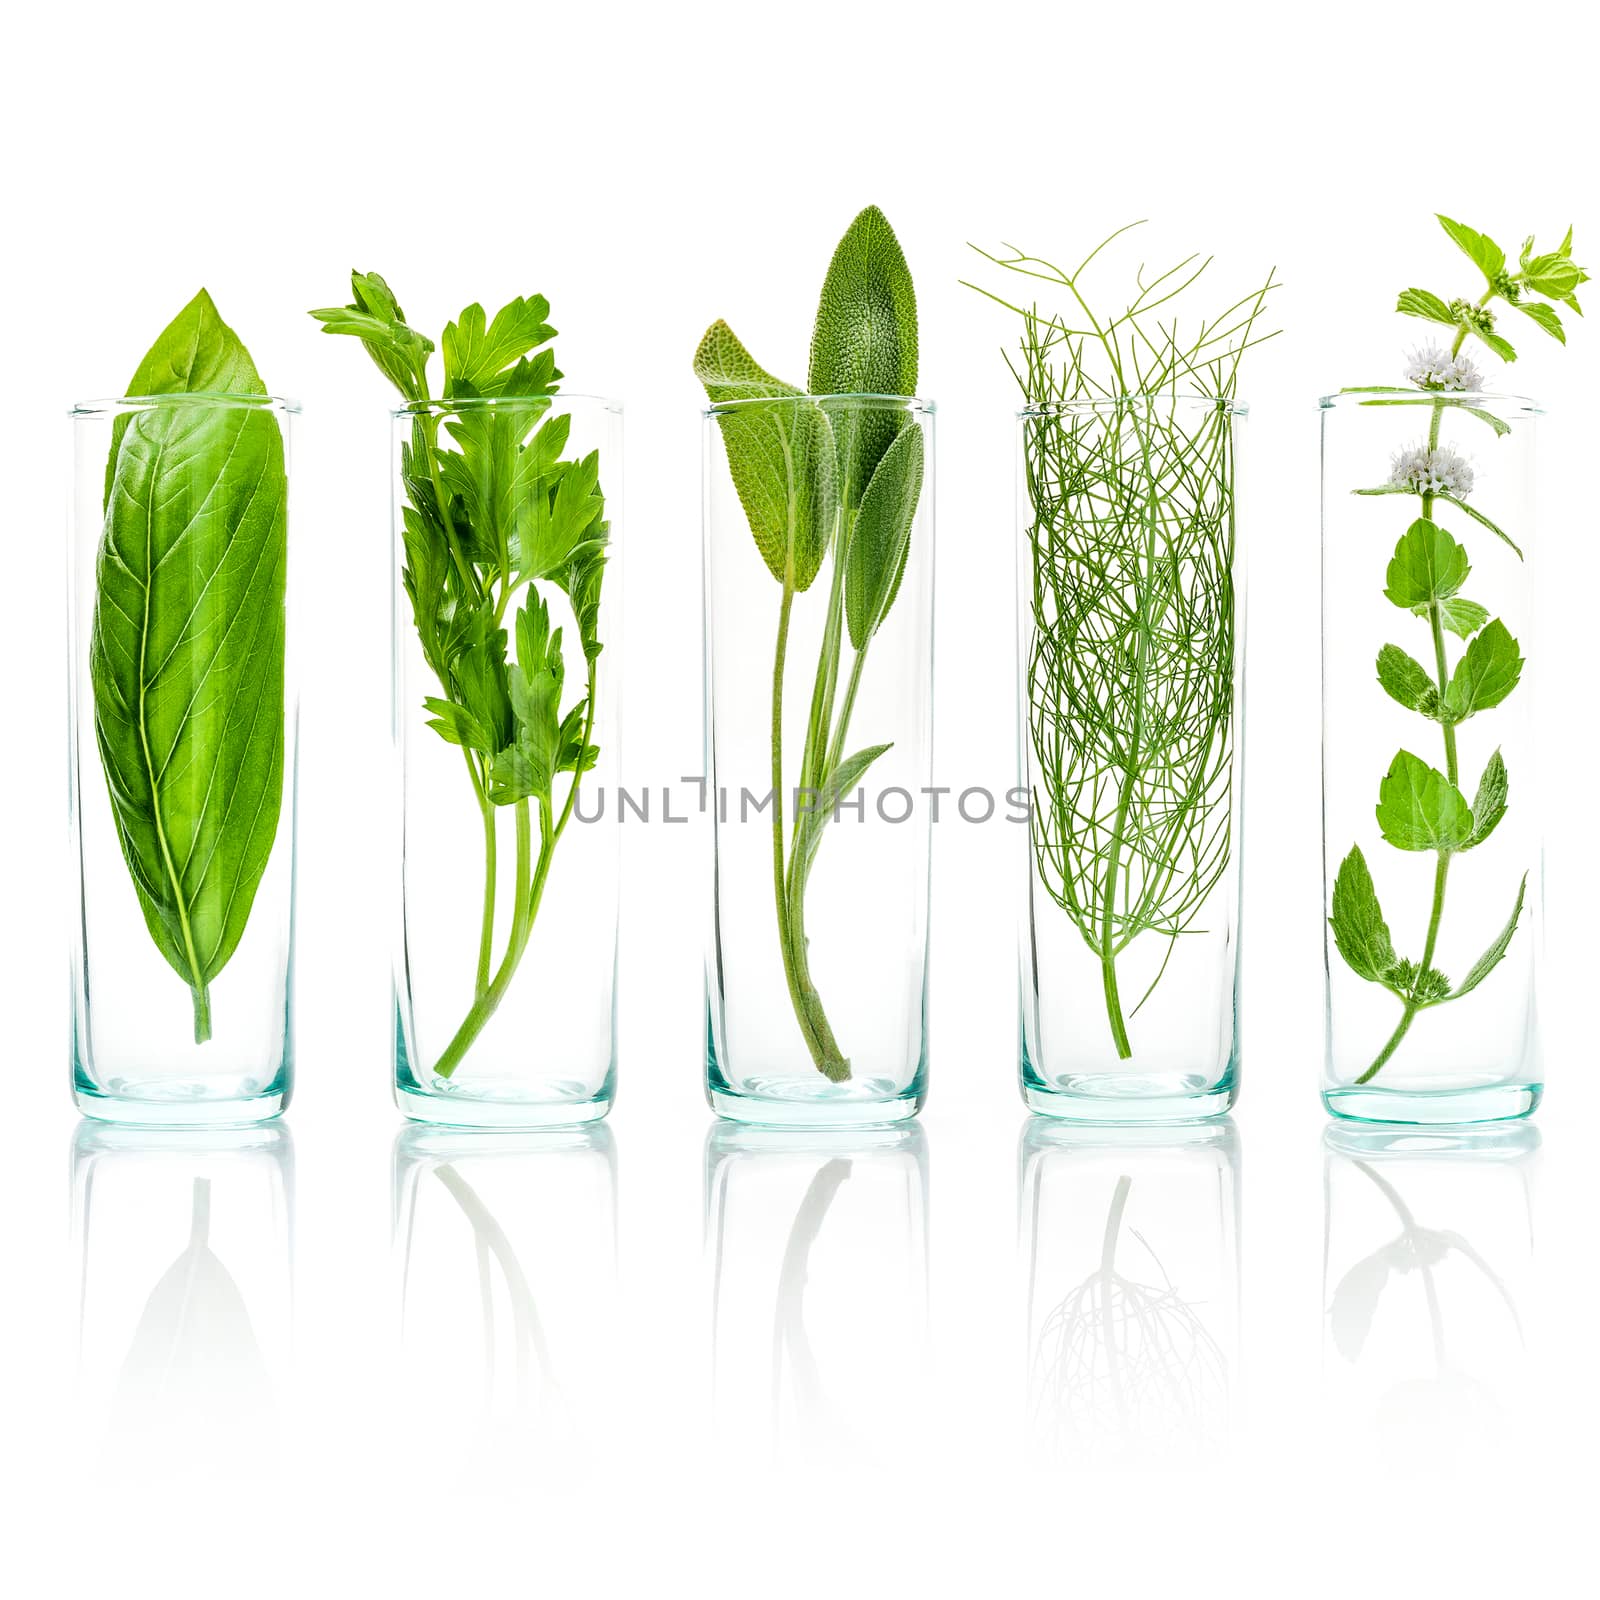 Close Up bottles of fresh aromatic herbs . Fresh sage branch , sweet basil leaves ,fennel ,parsley and peppermint branch isolated on white background.